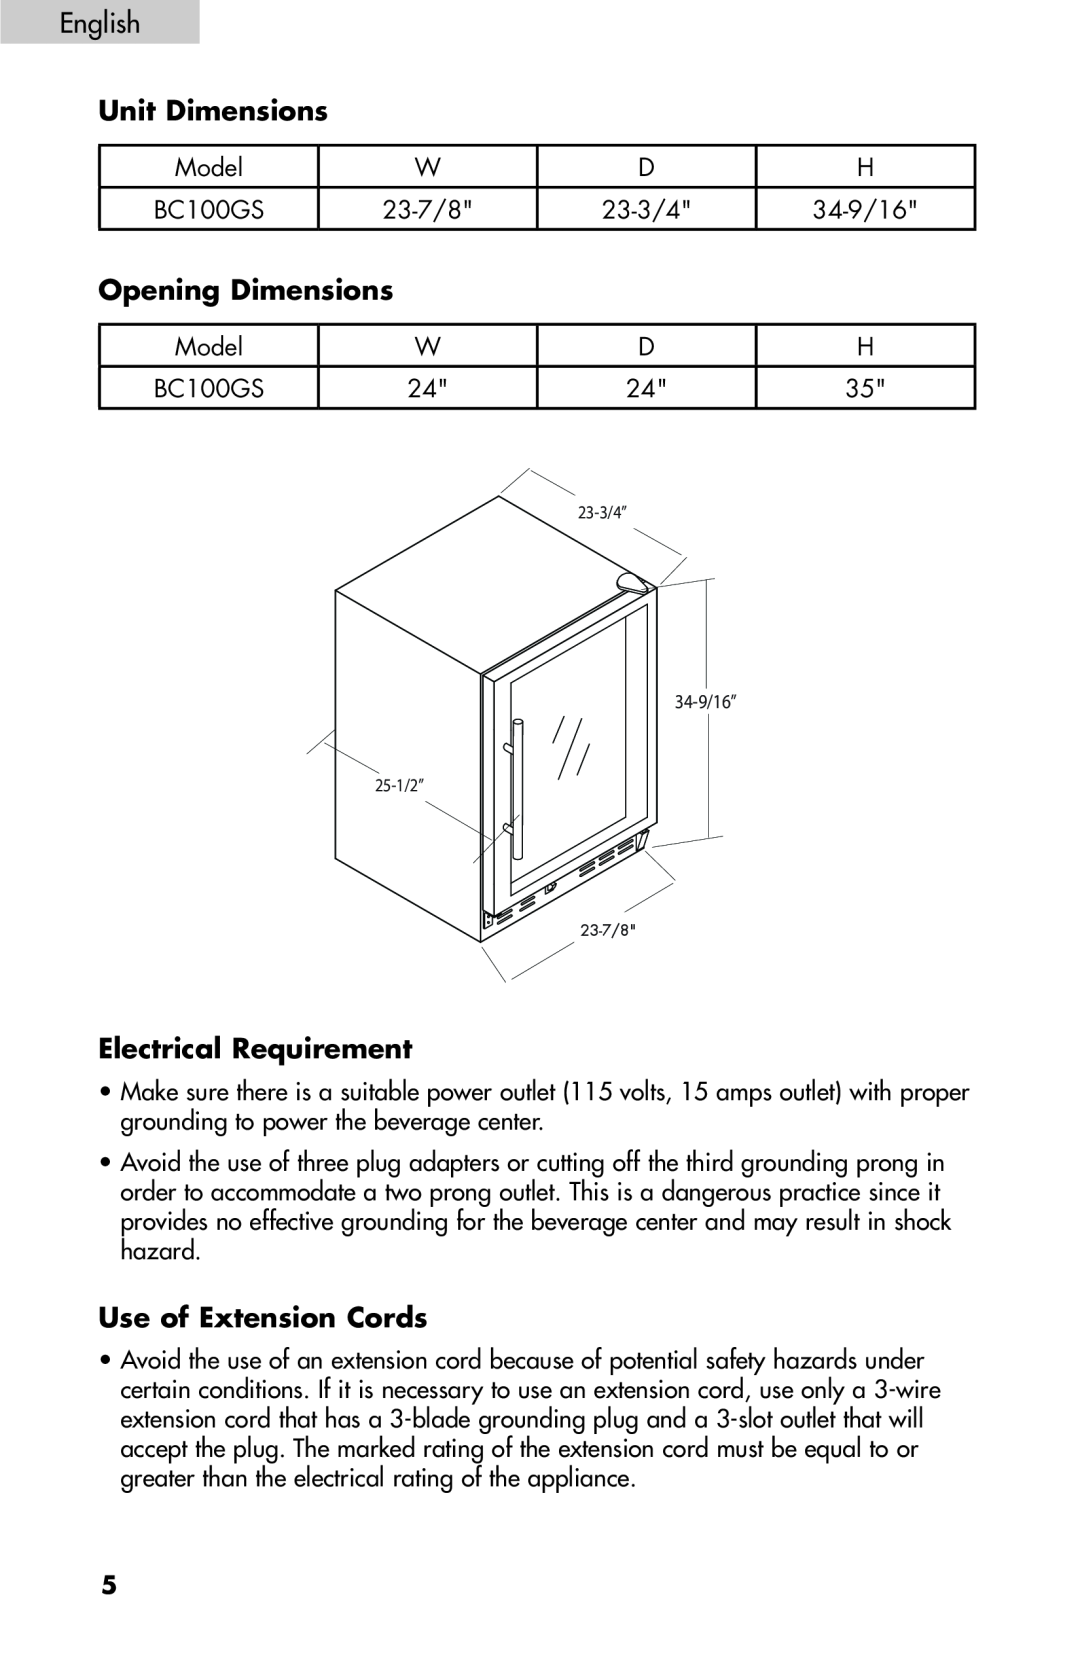 Haier BC100GS manual Unit Dimensions, Opening Dimensions, Electrical Requirement, Use of Extension Cords 